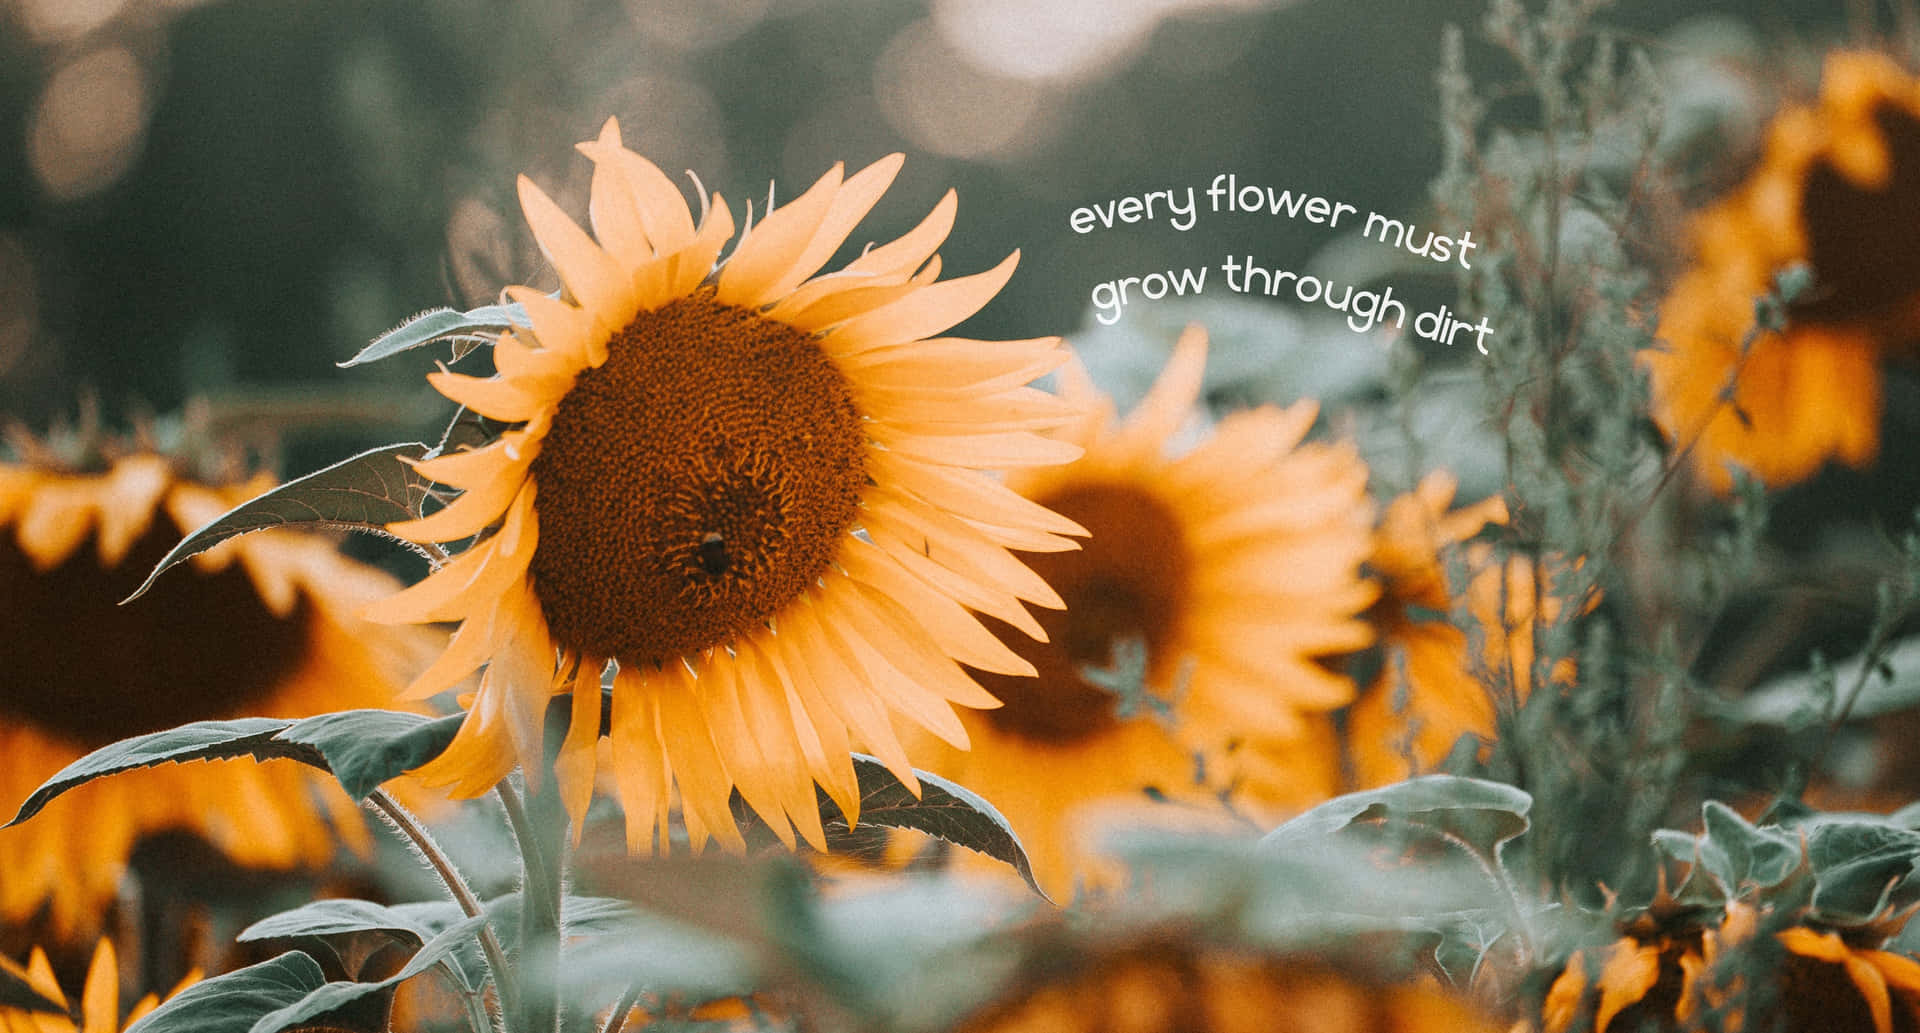 A happy sunflower with the quote "Love is the flower you have never picked" Wallpaper